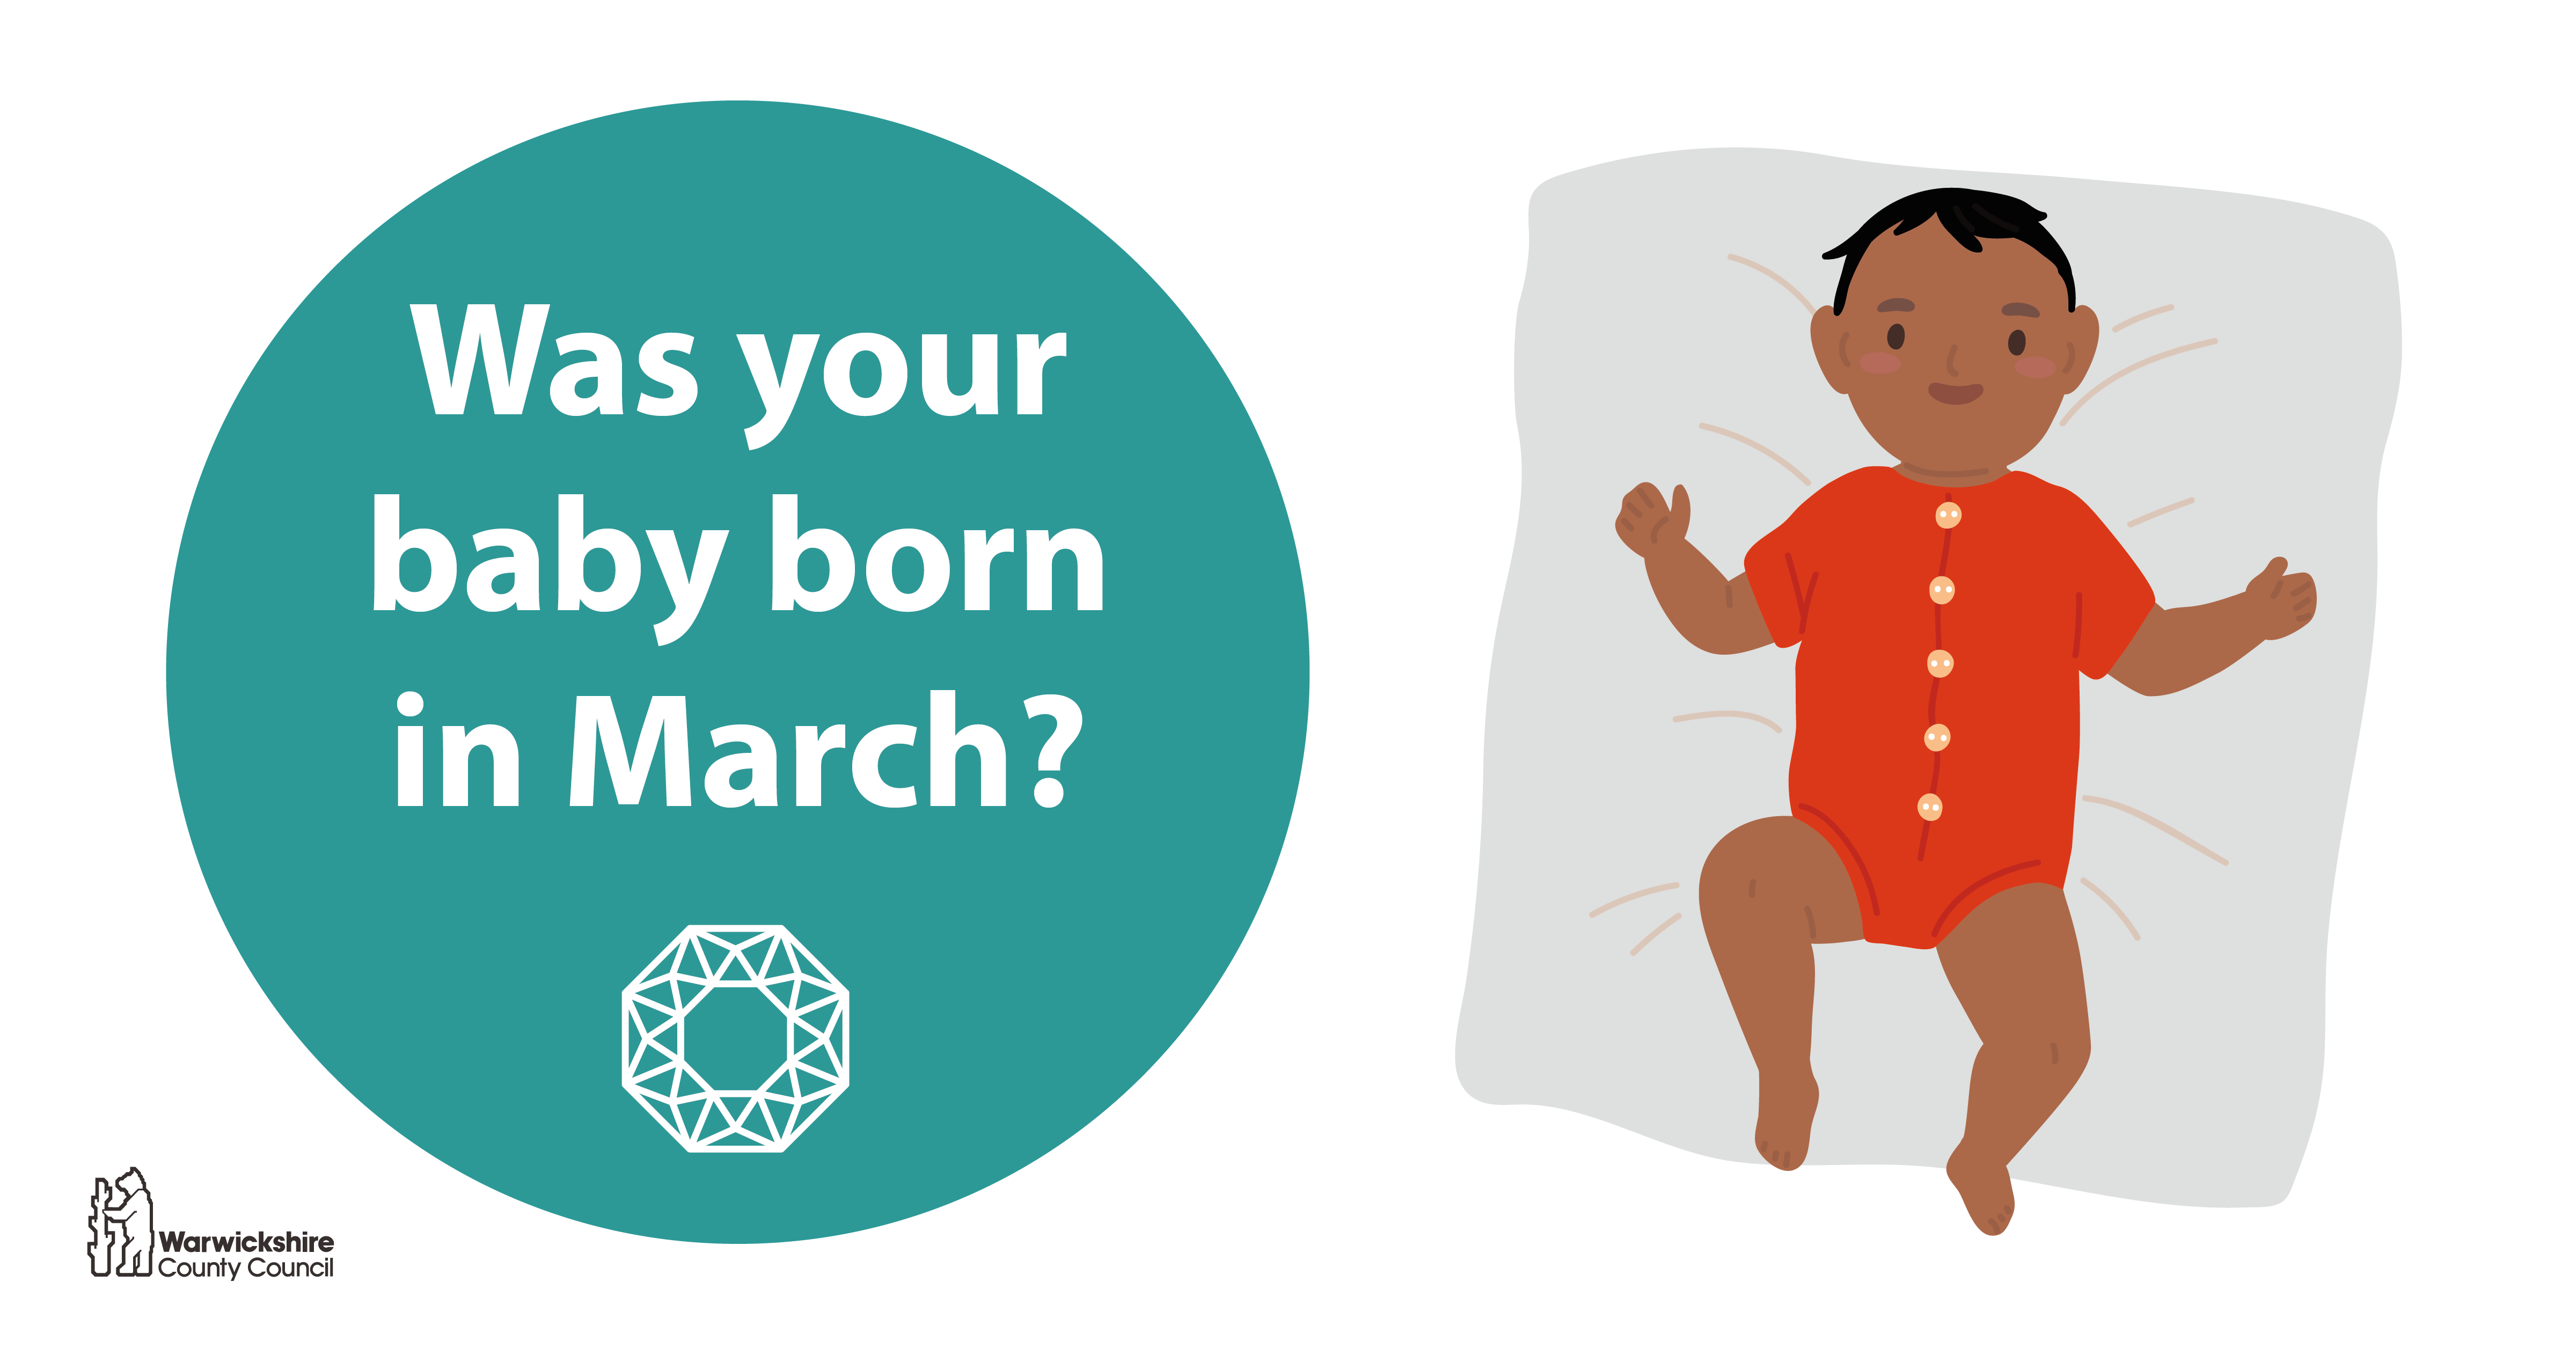 Babies born in March